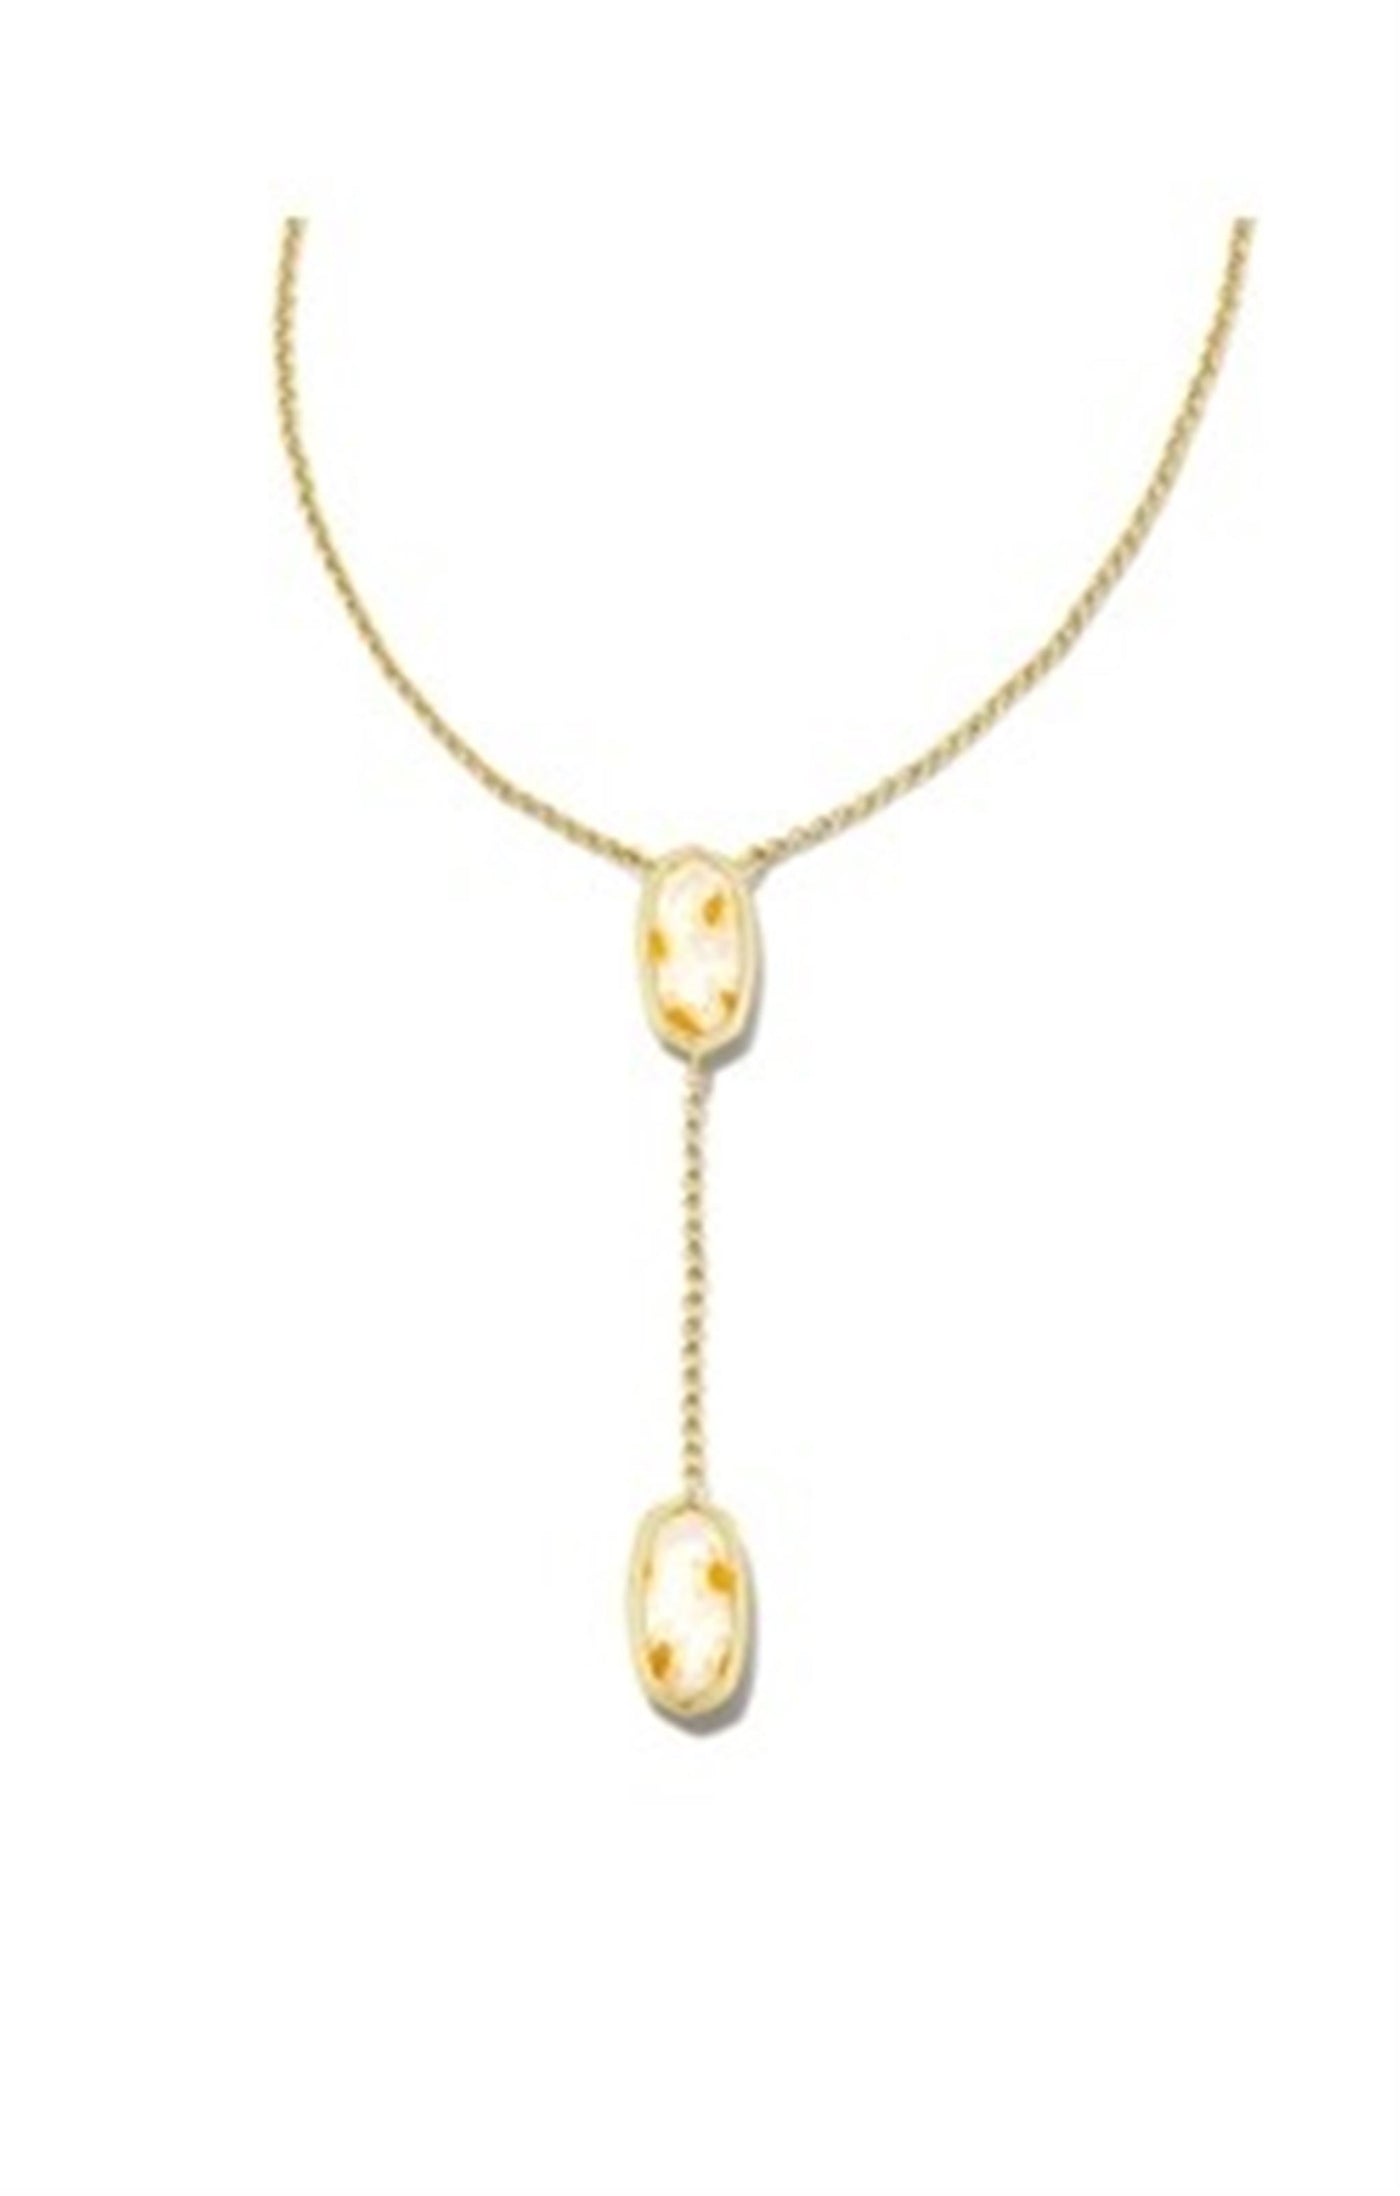 Gold Tone Necklace Featuring White Mosaic Glass by Kendra Scott